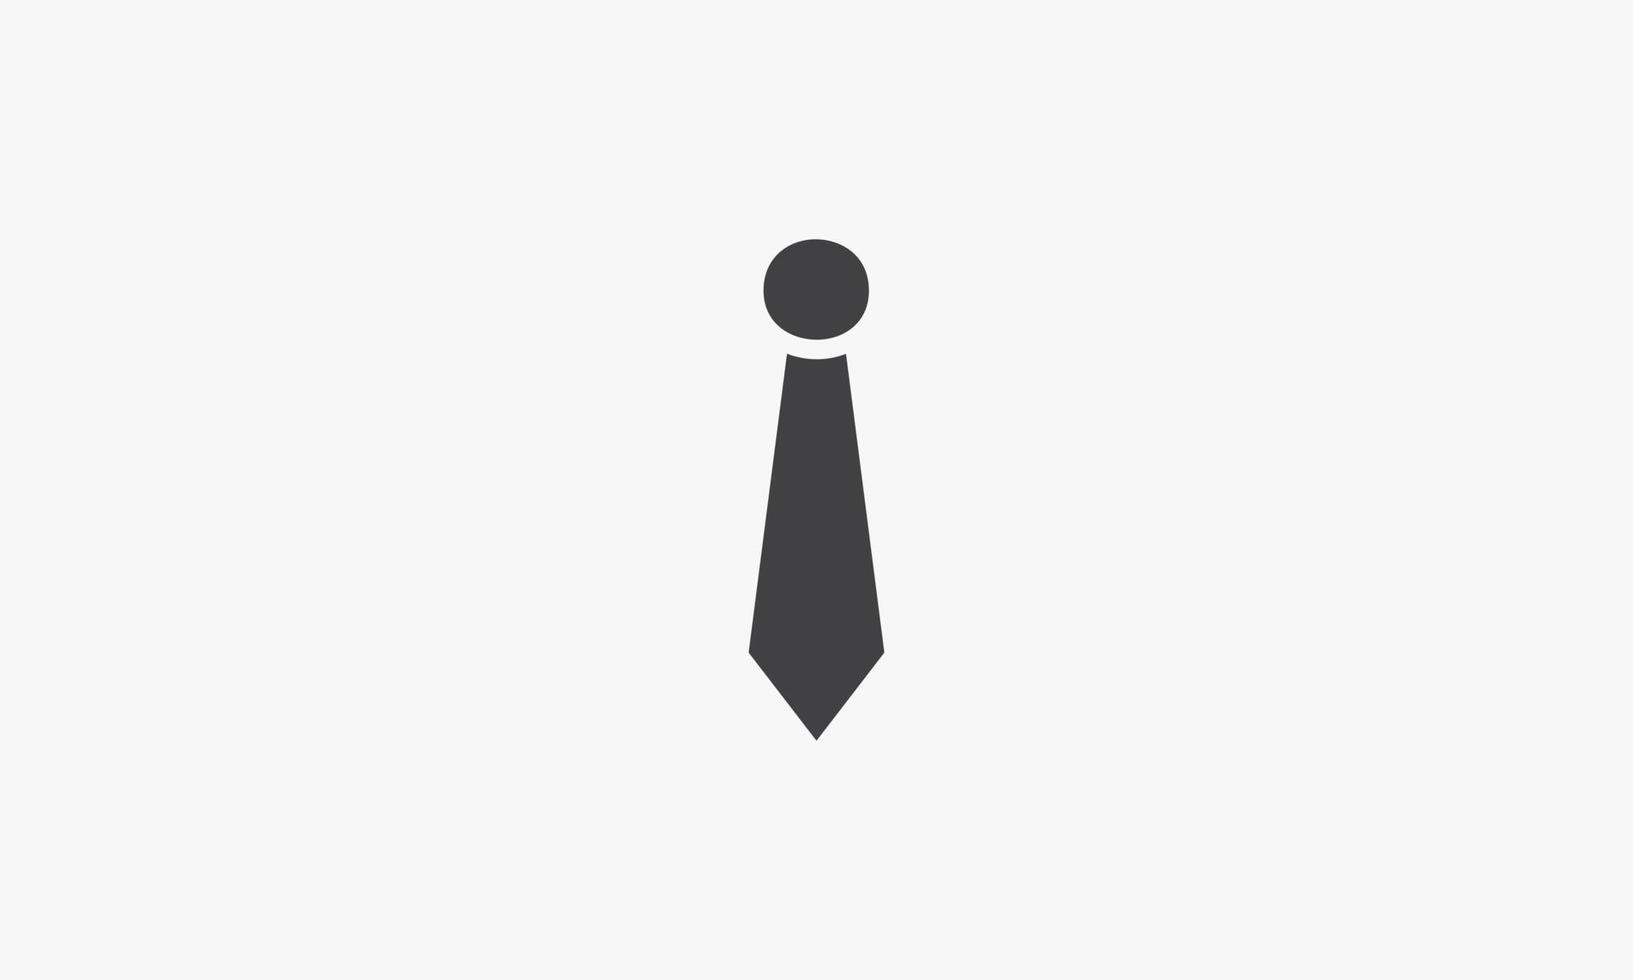 formal tie icon. isolated on white background. vector illustration.